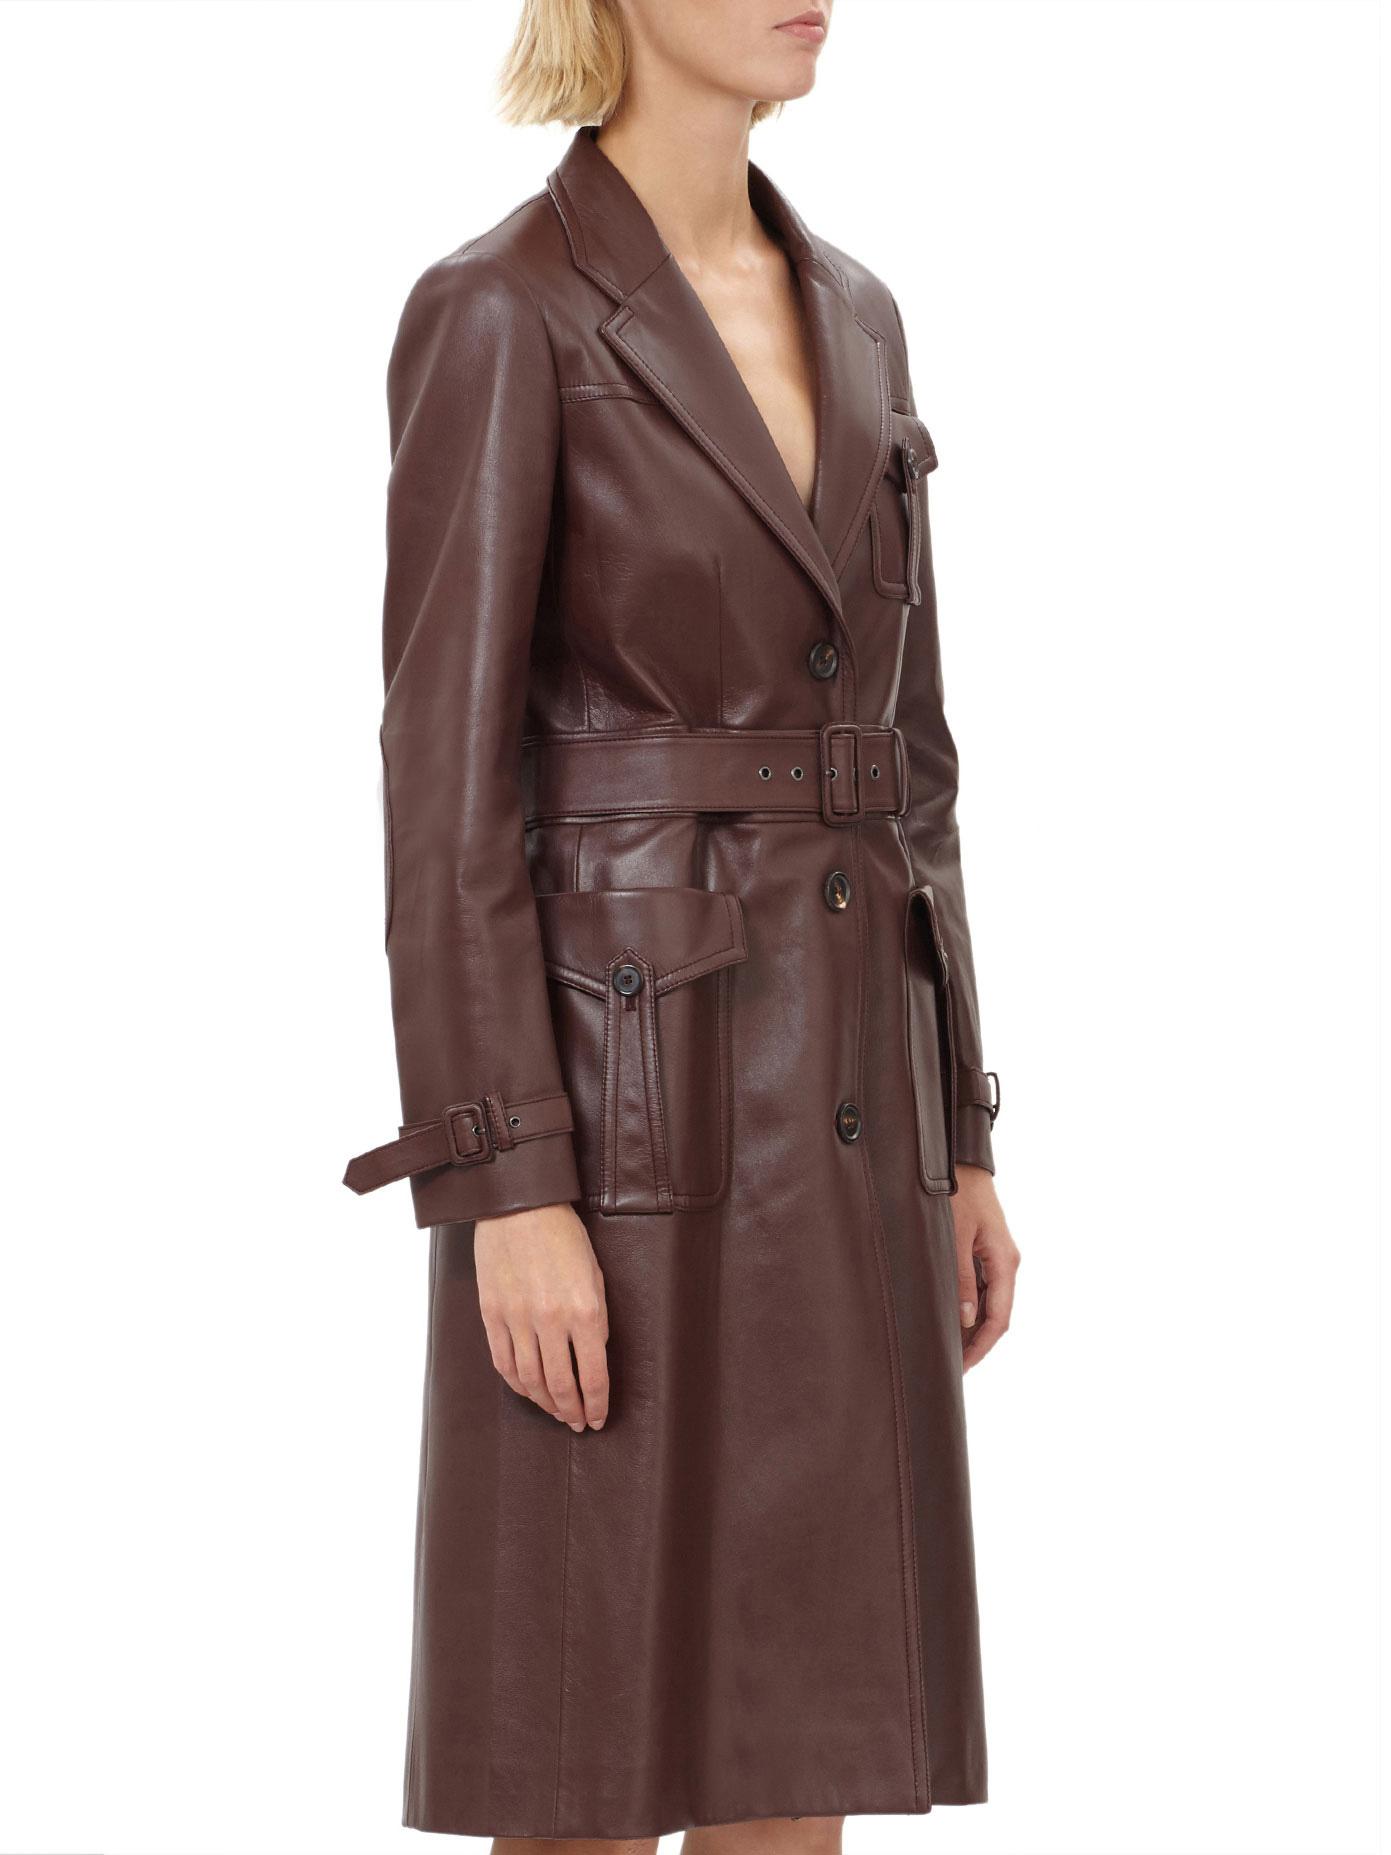 Prada Leather Trench Coat in Bordeaux (Brown) | Lyst